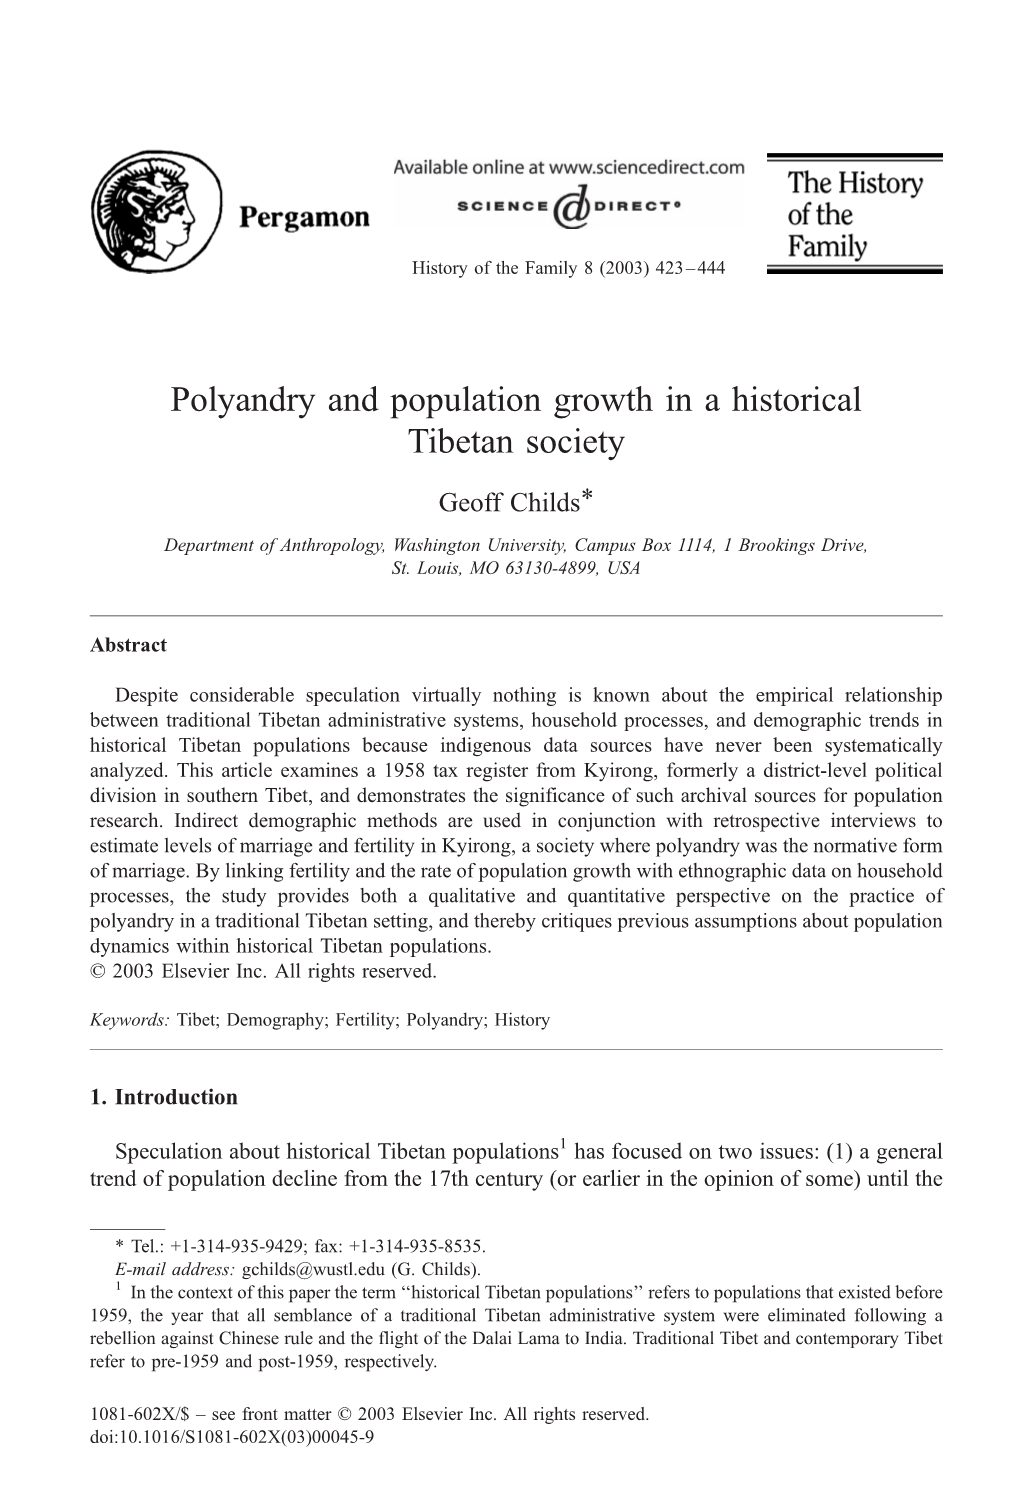 Polyandry and Population Growth in a Historical Tibetan Society